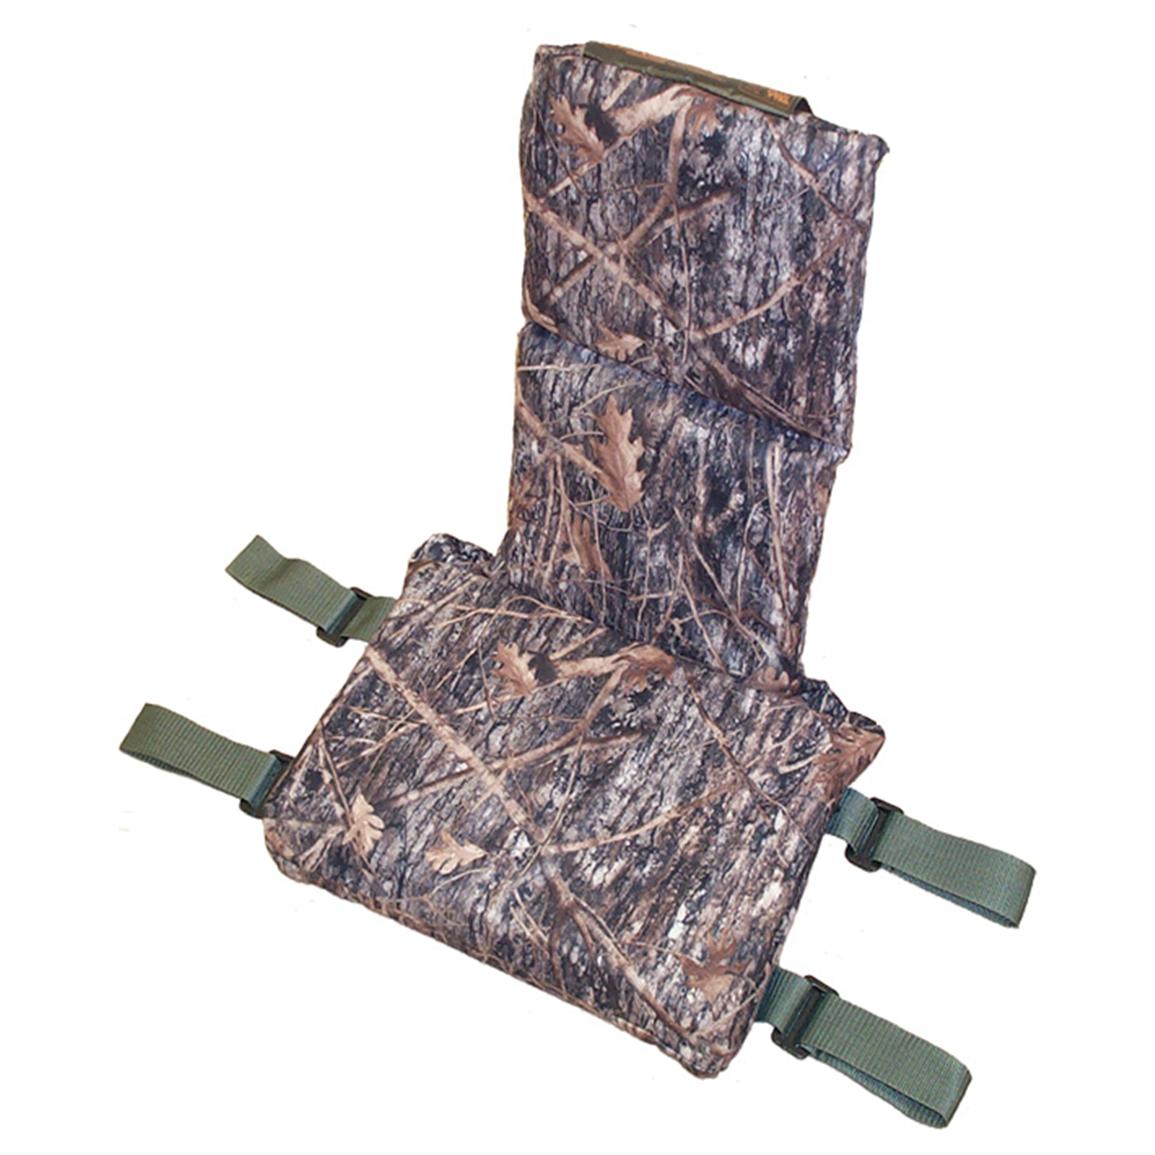 Hazmore Silent Seat replacement tree stand seat for Lone Wolf tree stand 